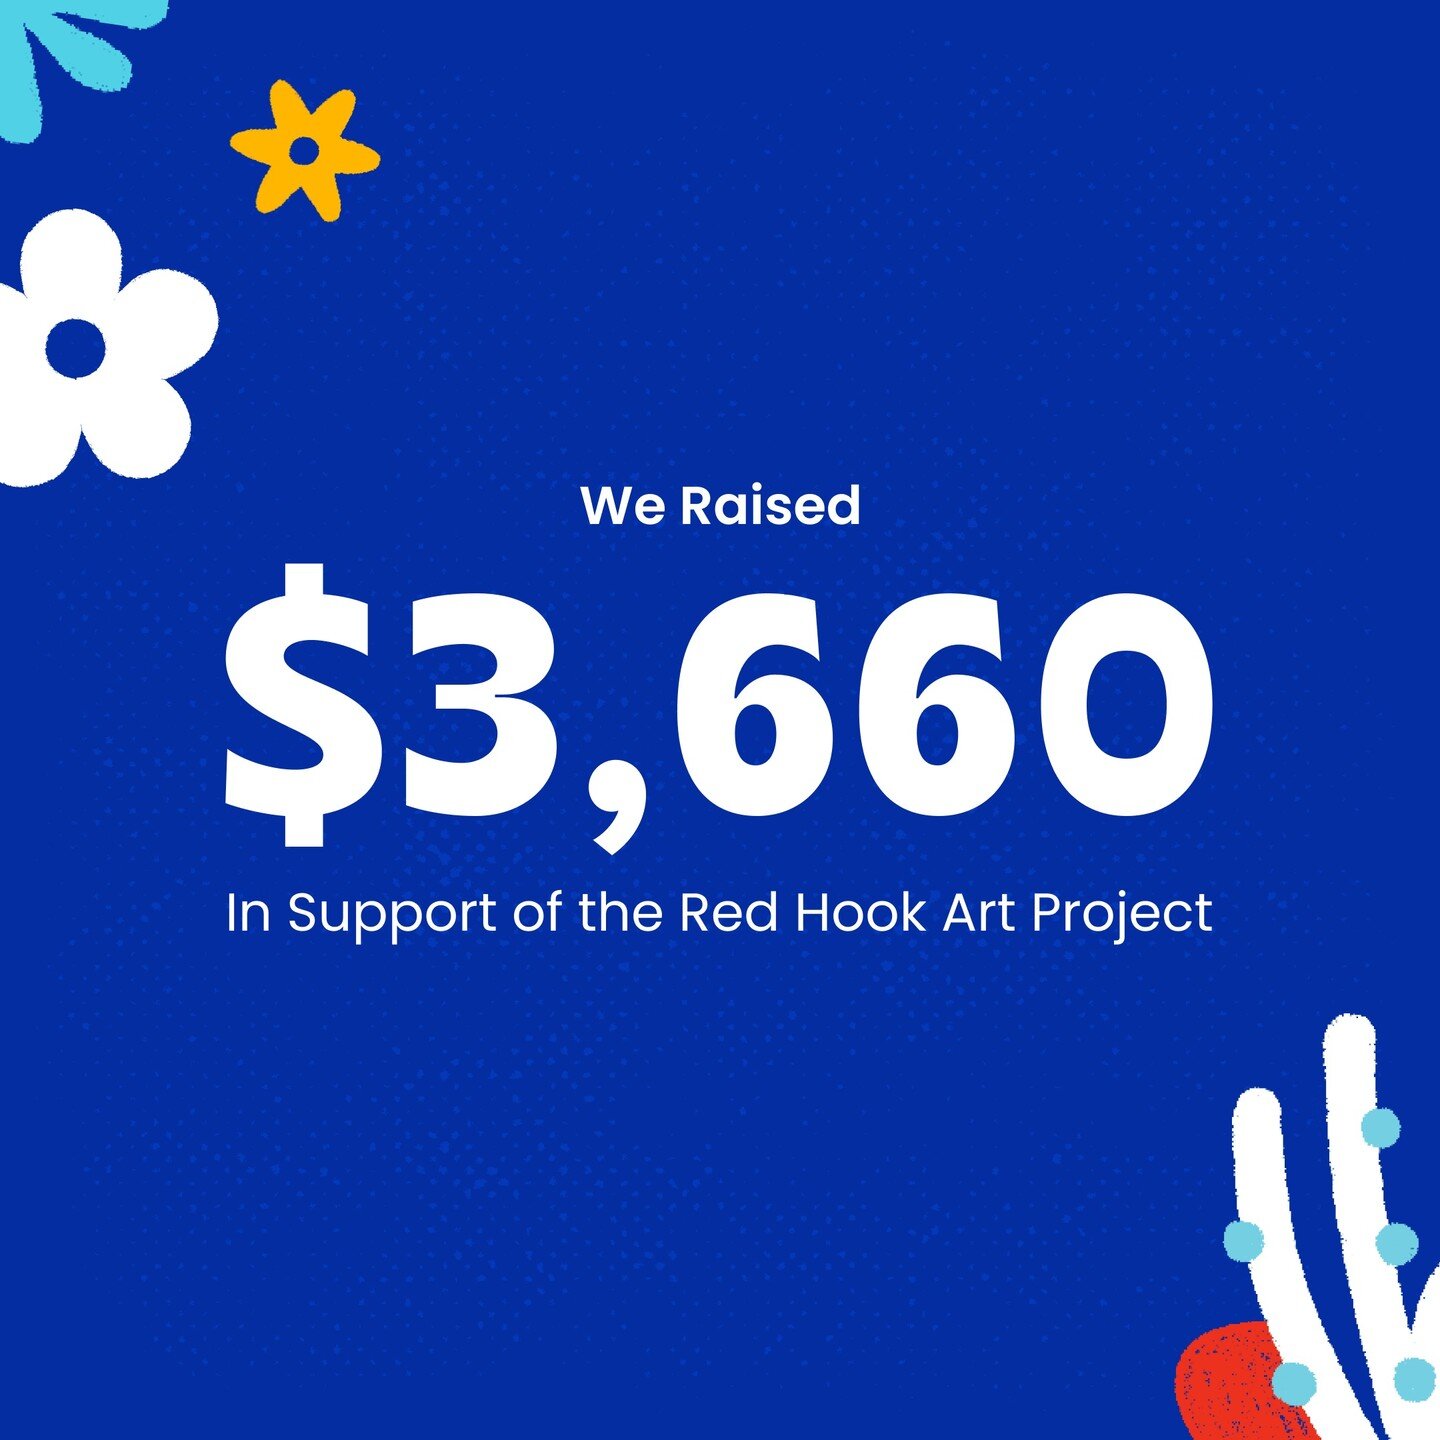 Hello everyone, we are happy to announce we have raised $3,660 in support of the Red Hook Project! Thank you to everyone who grabbed a print, shared our post online and to all the artists that contributed their skills and beautiful work! 

✏︎ Til' ne